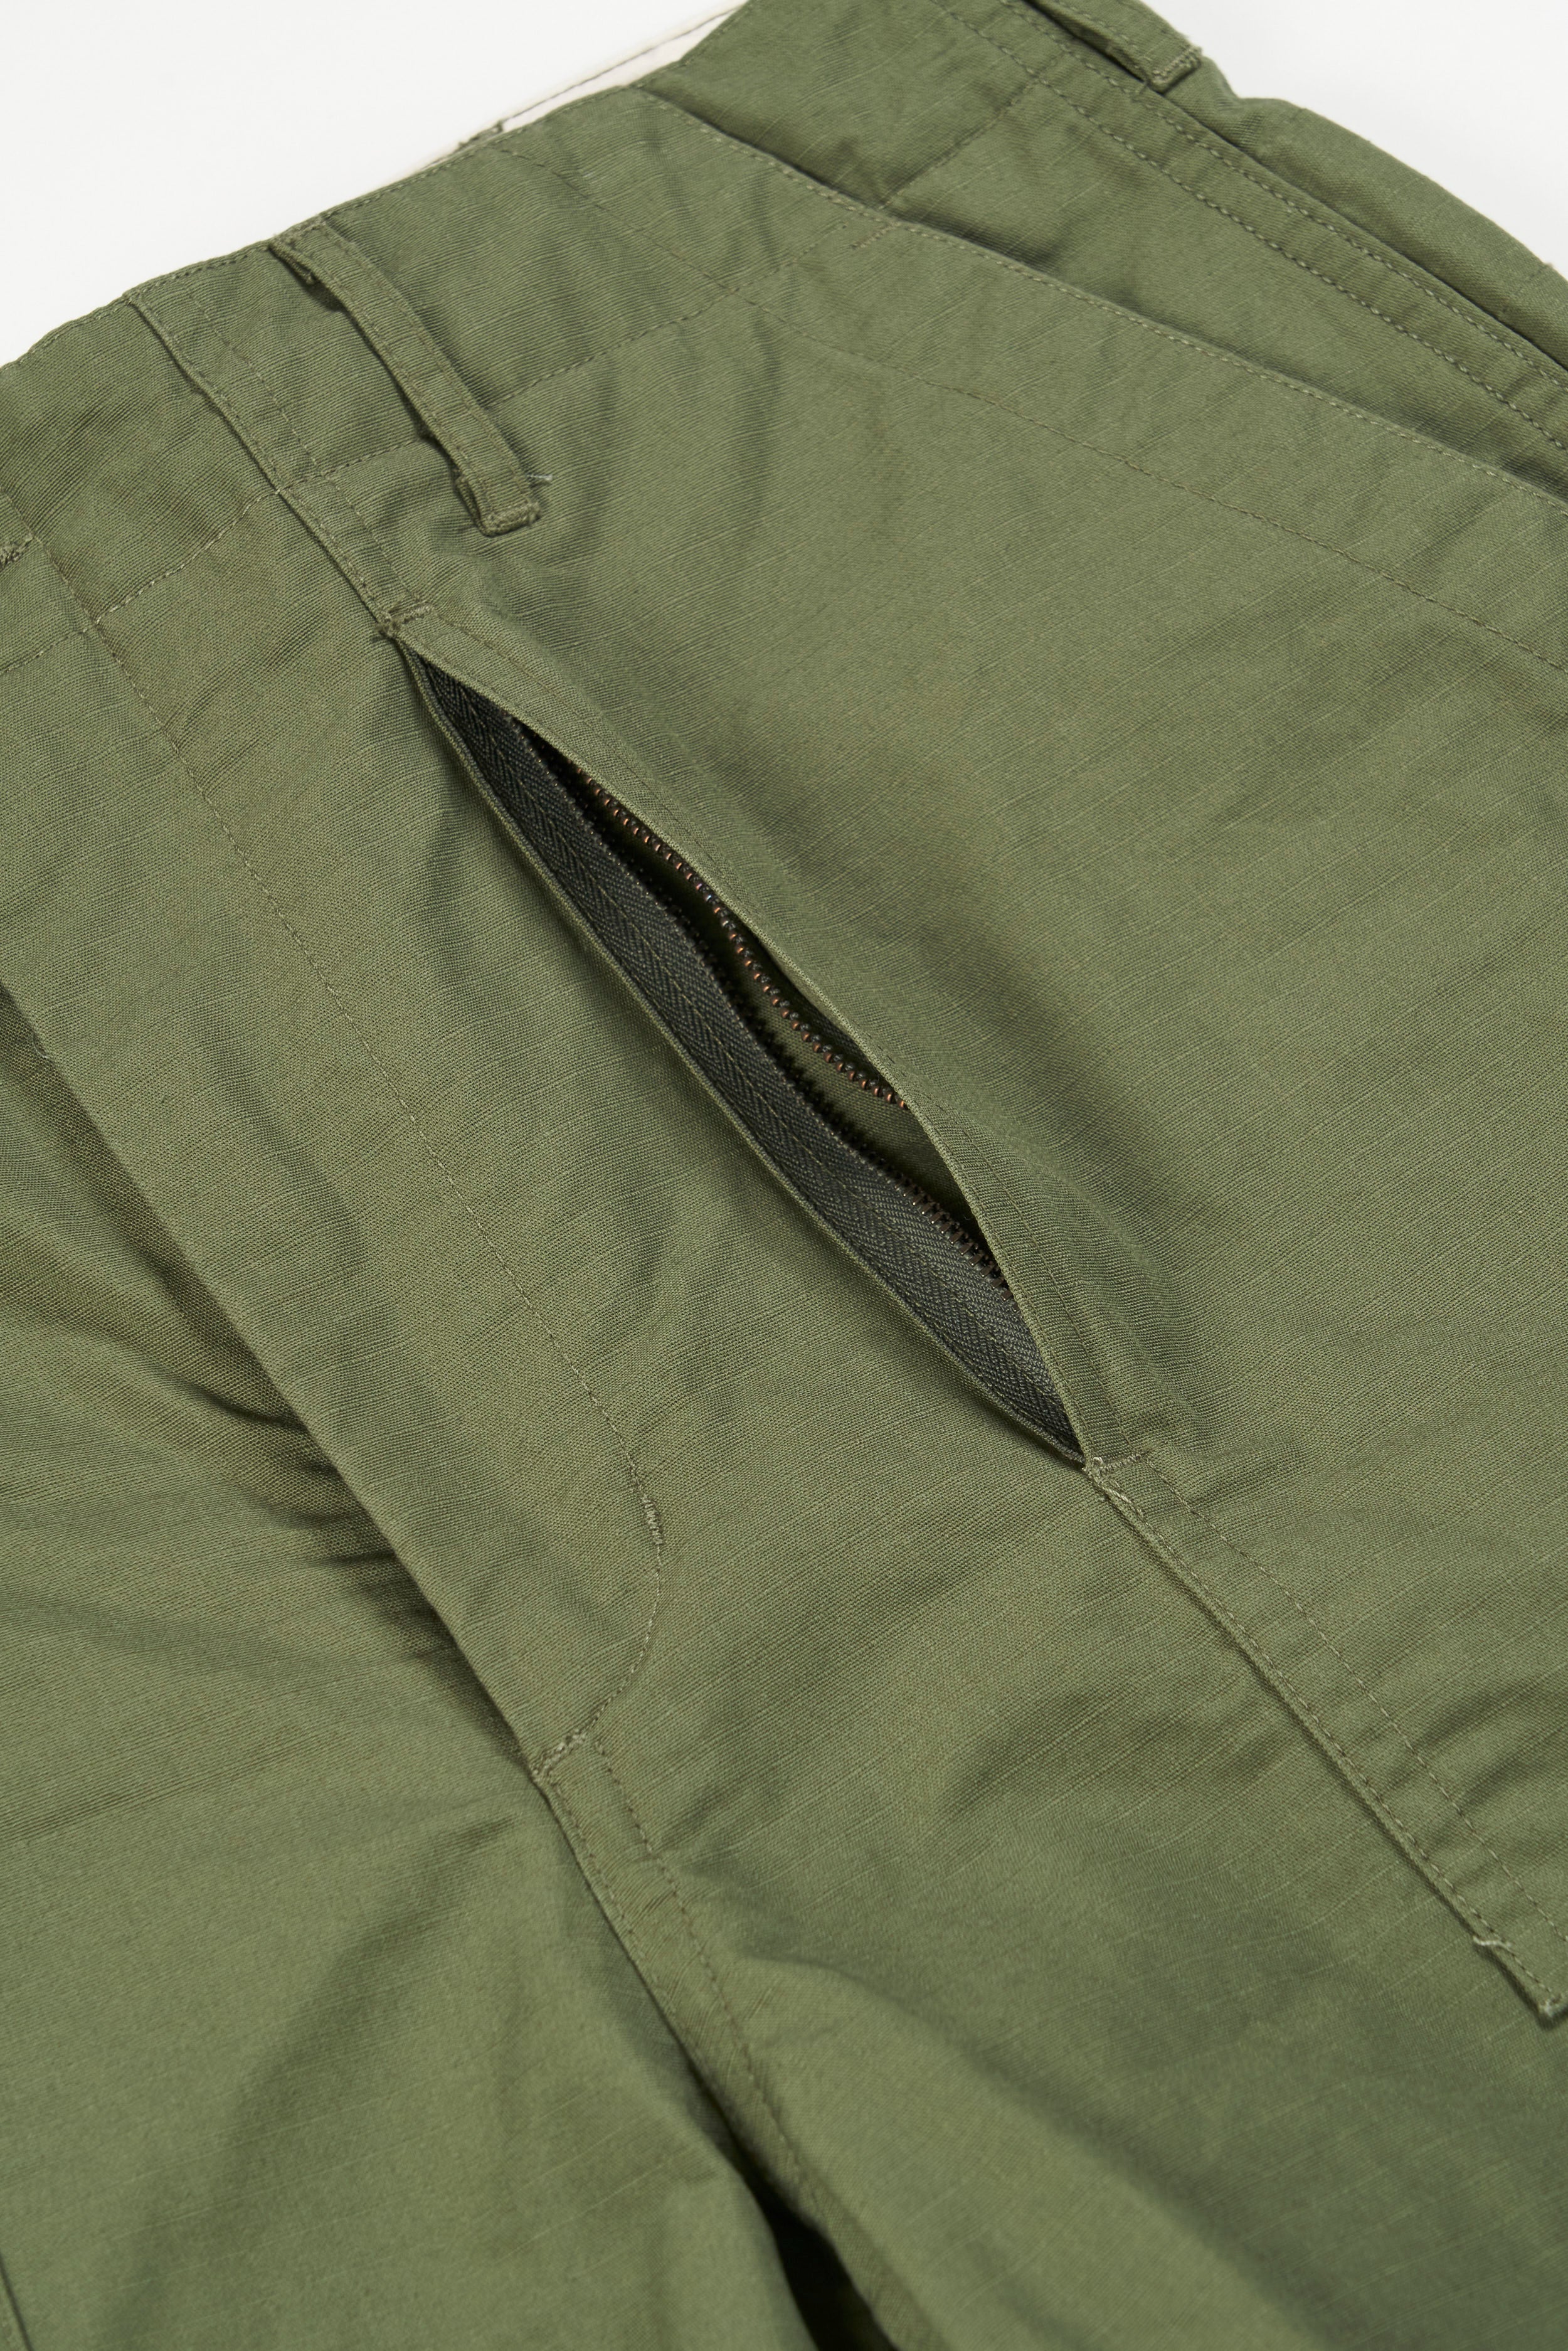 Engineered Garments Fatigue Short - Olive Cotton Ripstop